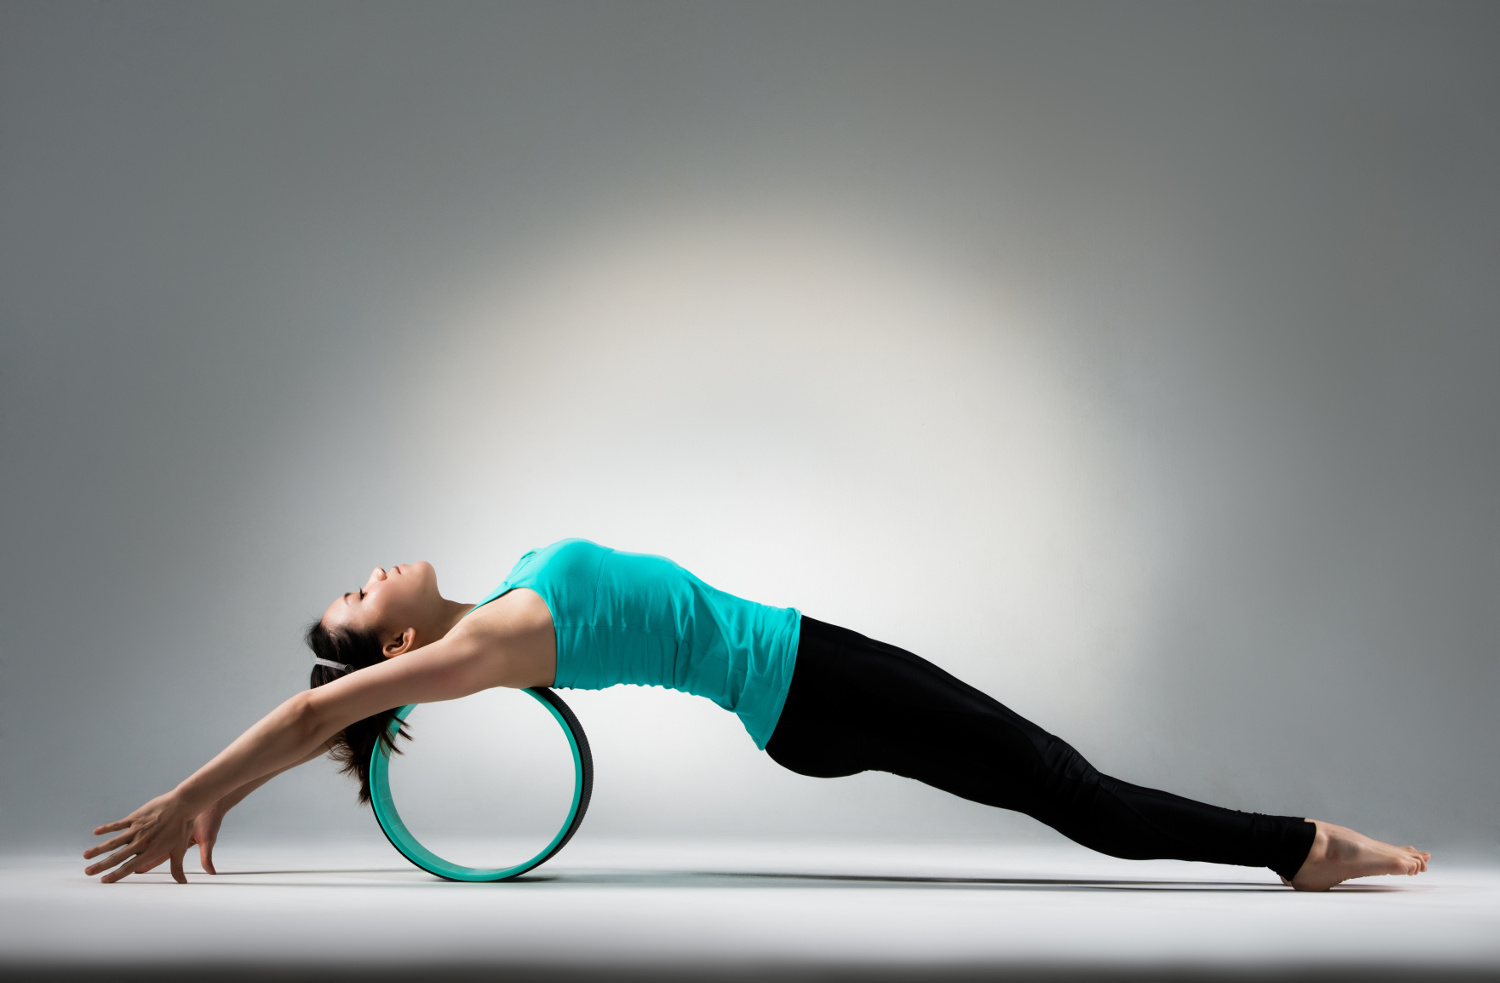 Pilates wheel being used to increase flexibility by lengthening the muscles